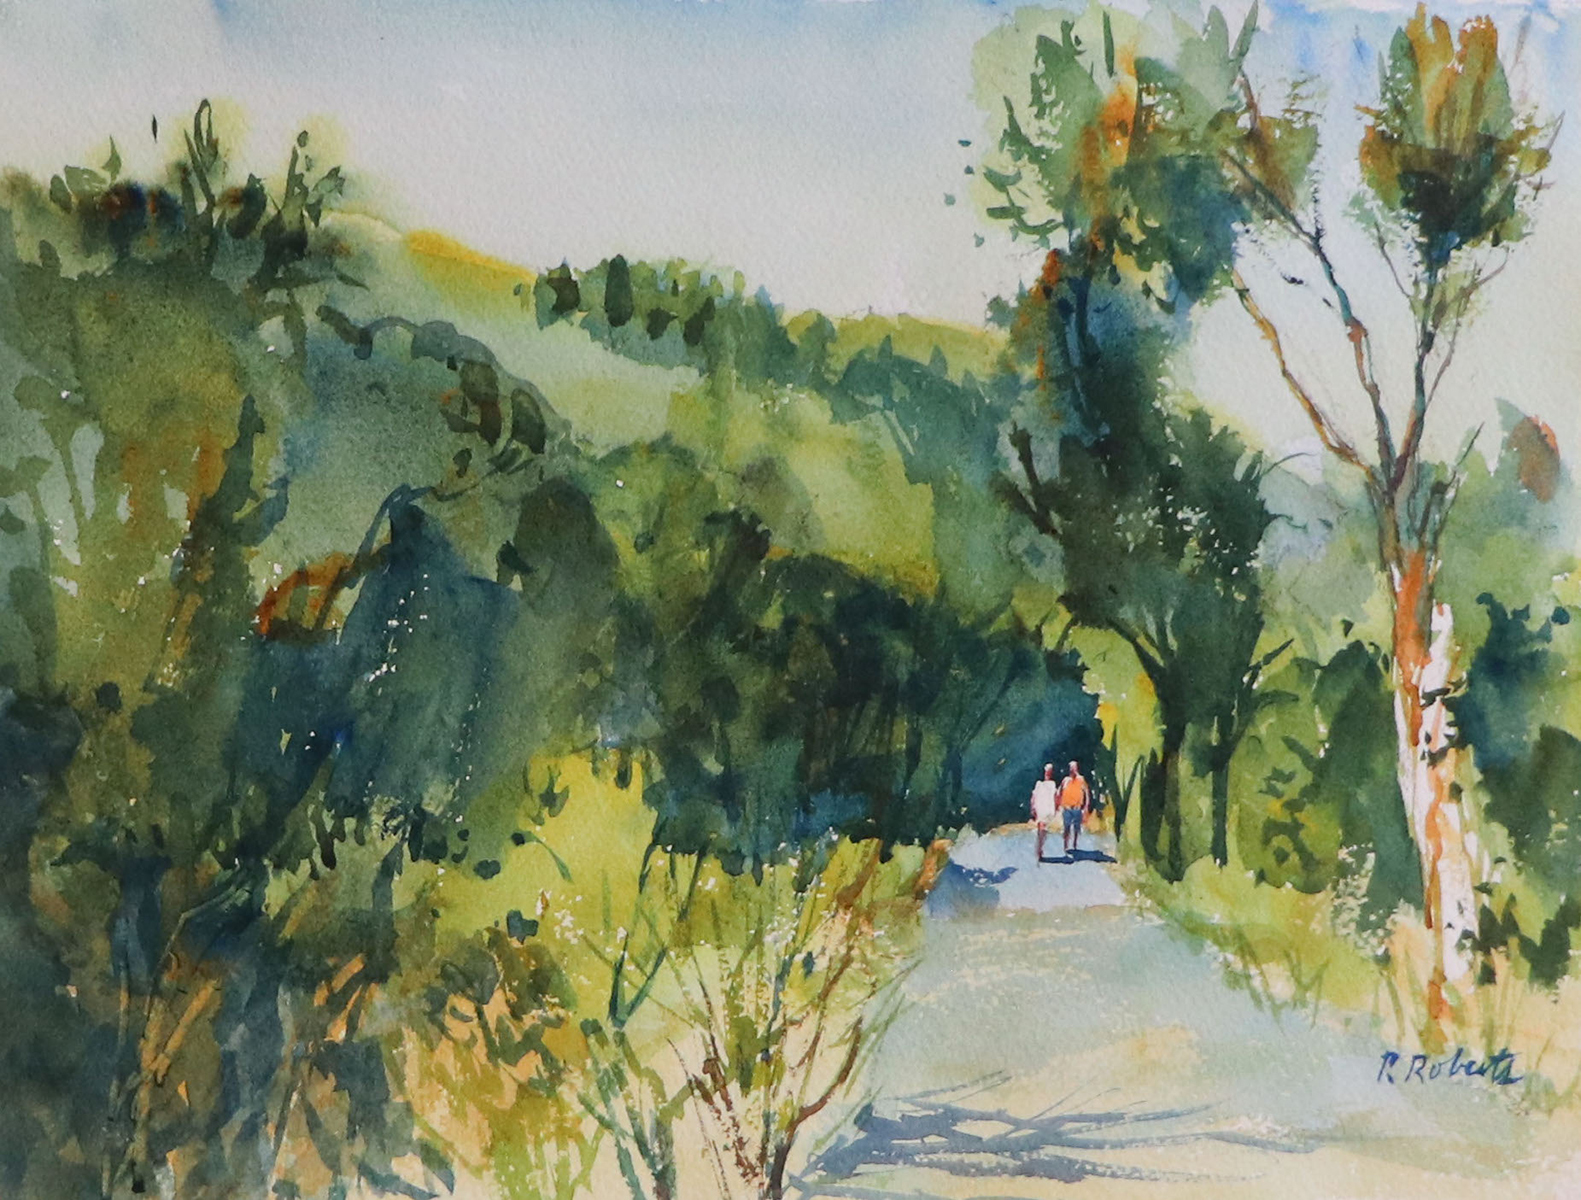 PETE ROBERTS - AFTERNOON WALK - WATERCOLOR - 11 X 15